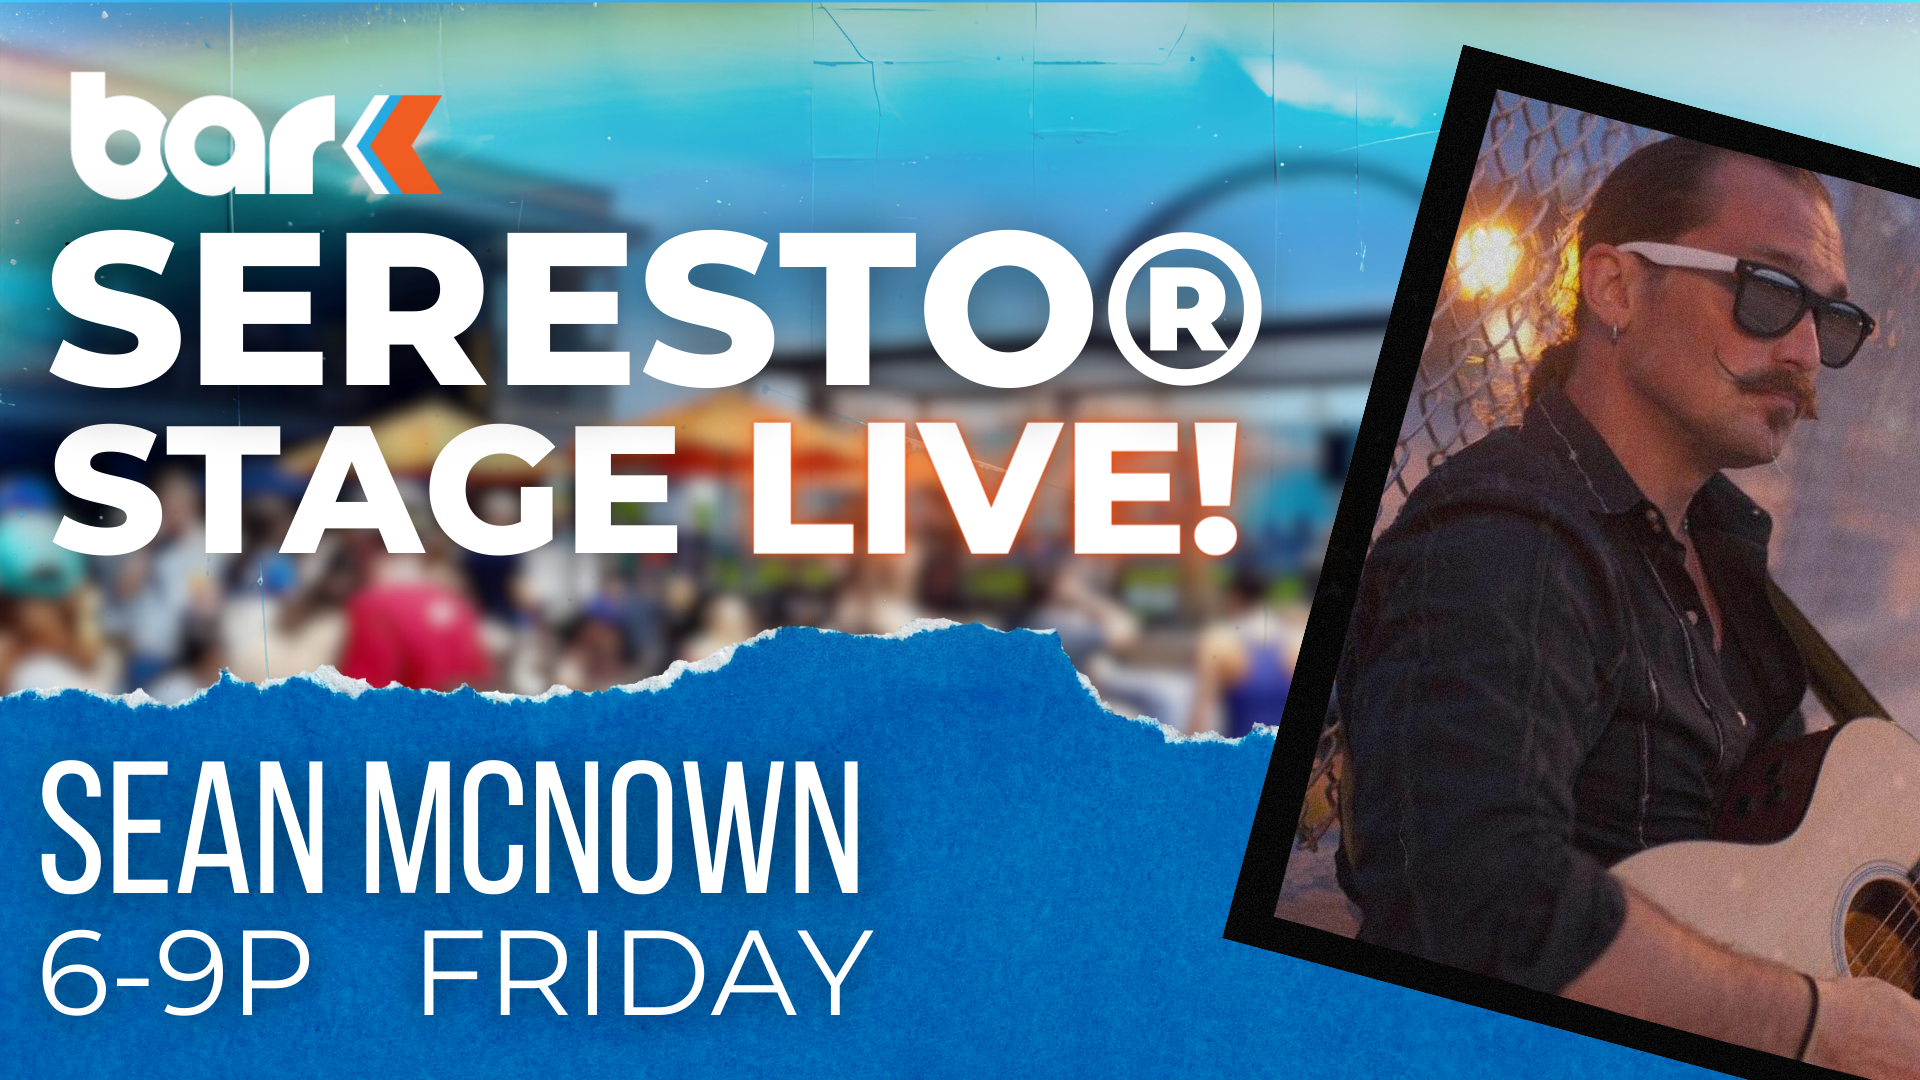 Bar K Seresto Stage Live. Sean Mcnown from 6 to 9 pm friday.